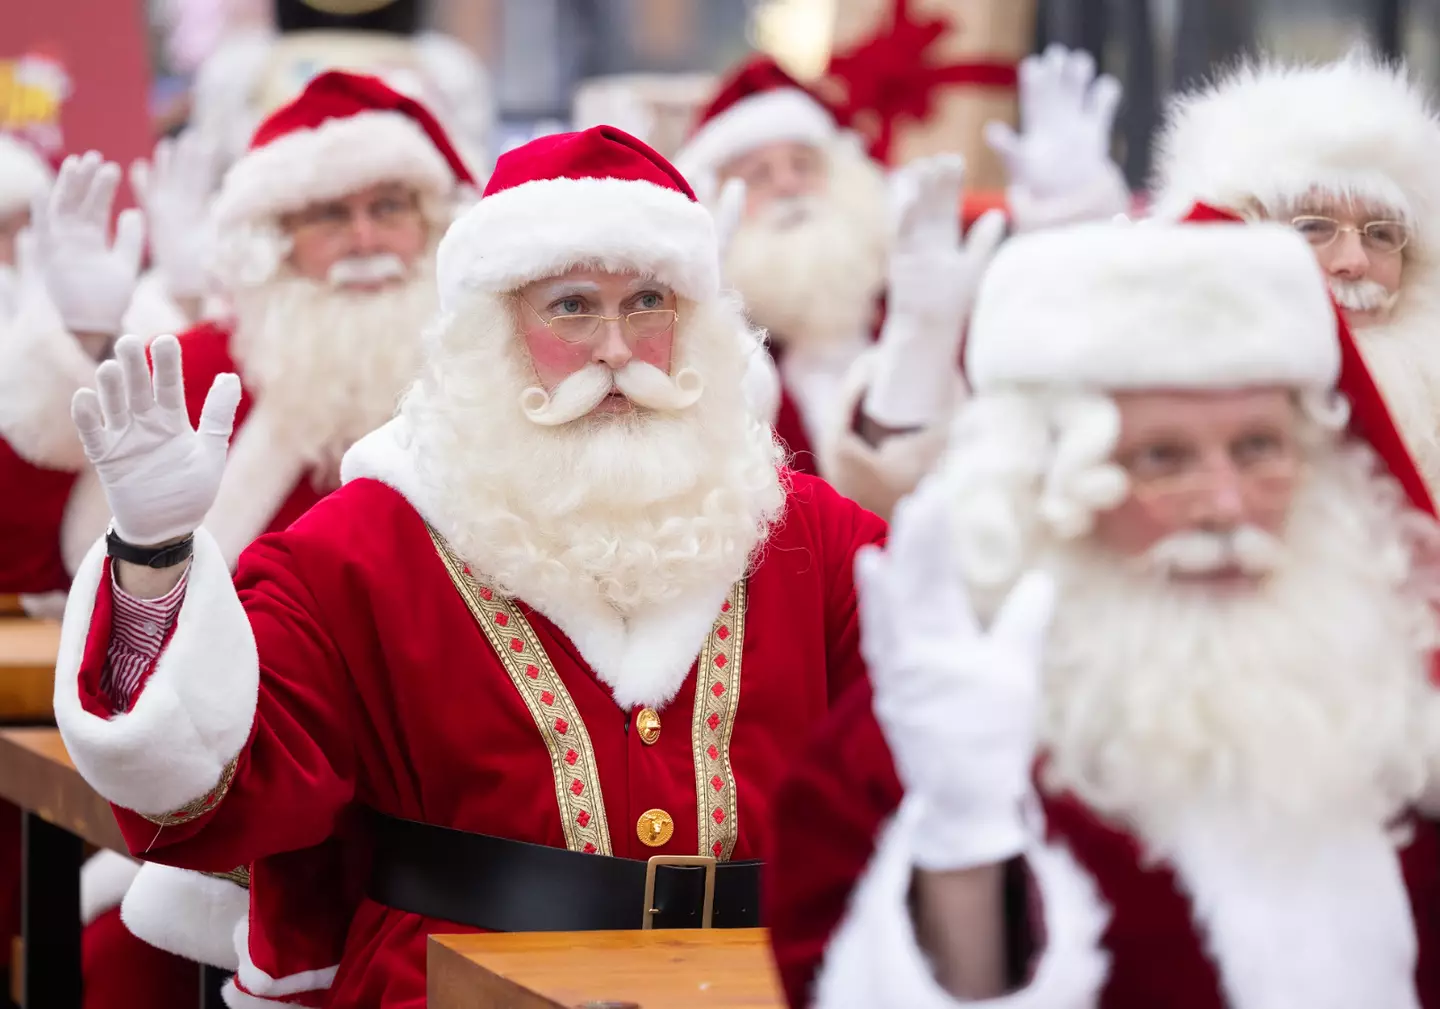 A surprising amount of trainee Santas don't make the cut.